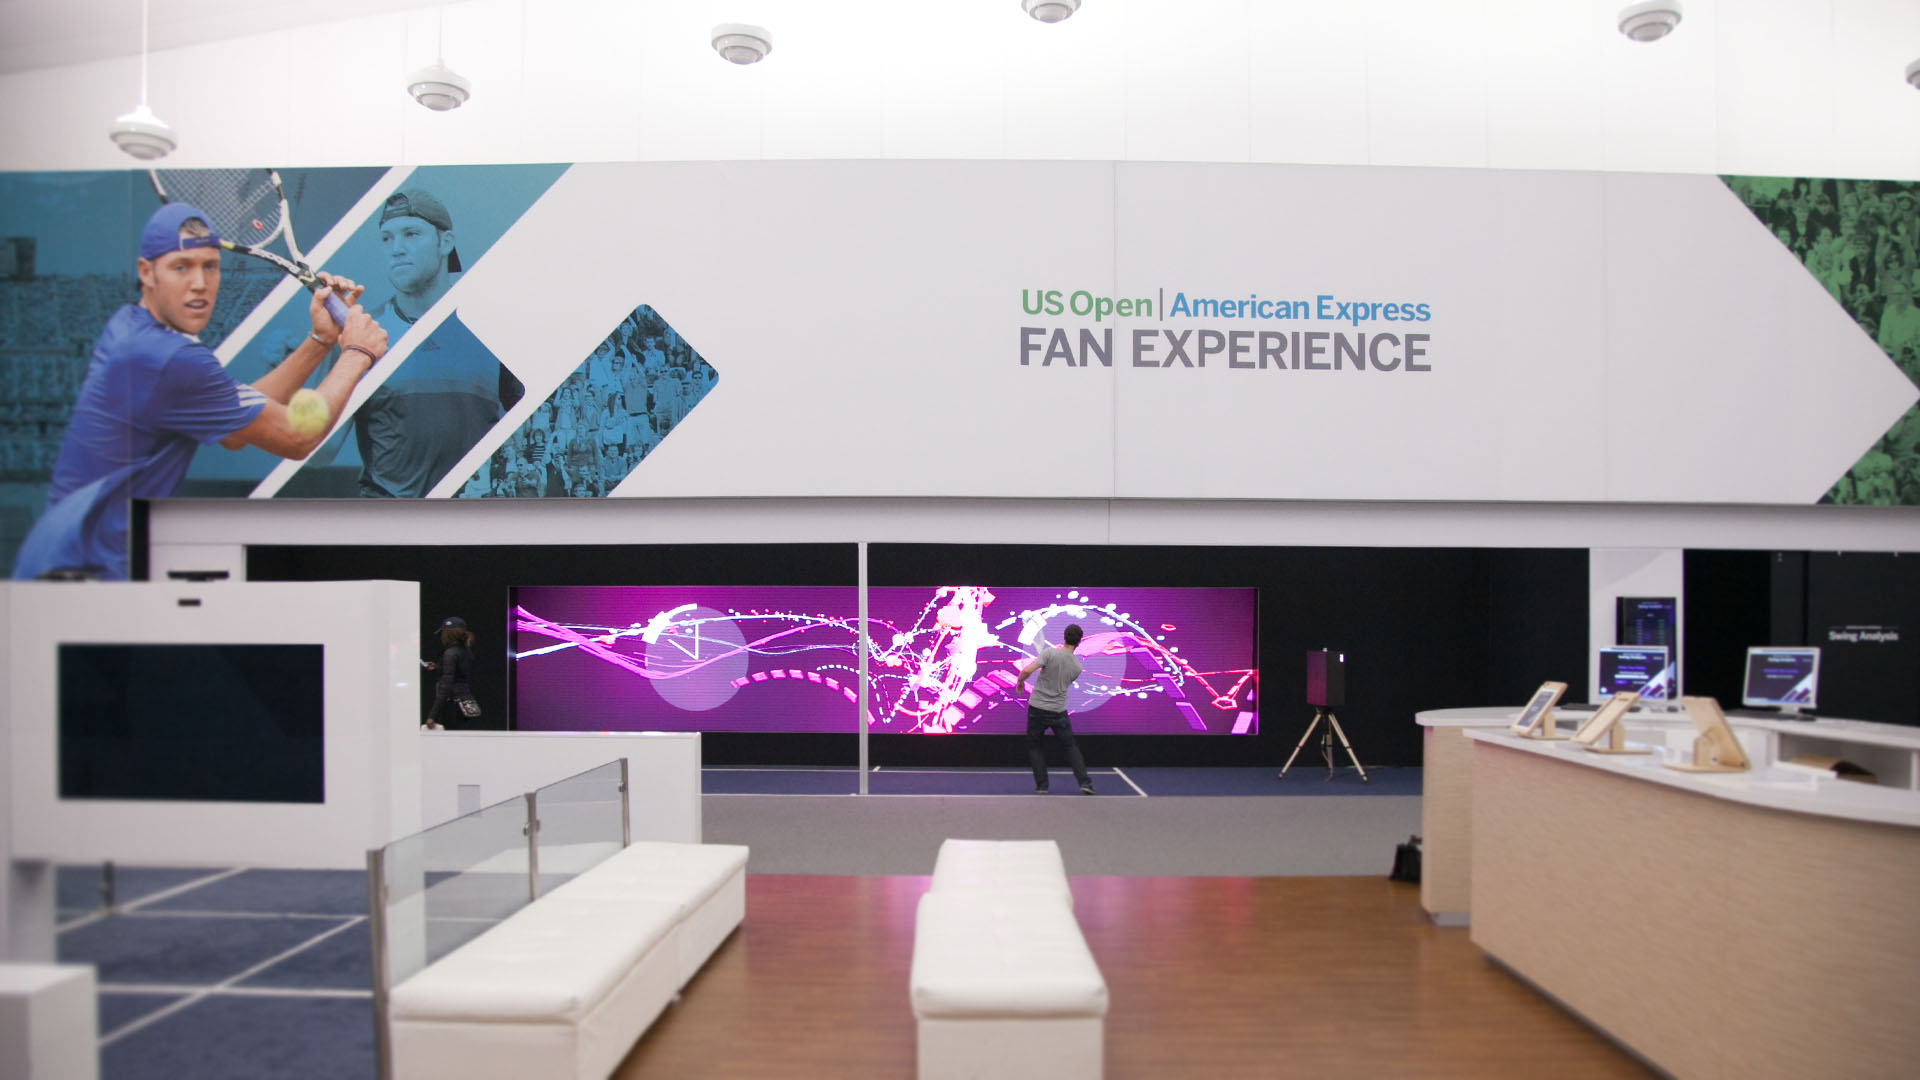 Art and Sound of Tennis - installed in the US Open American Express Fan Experience